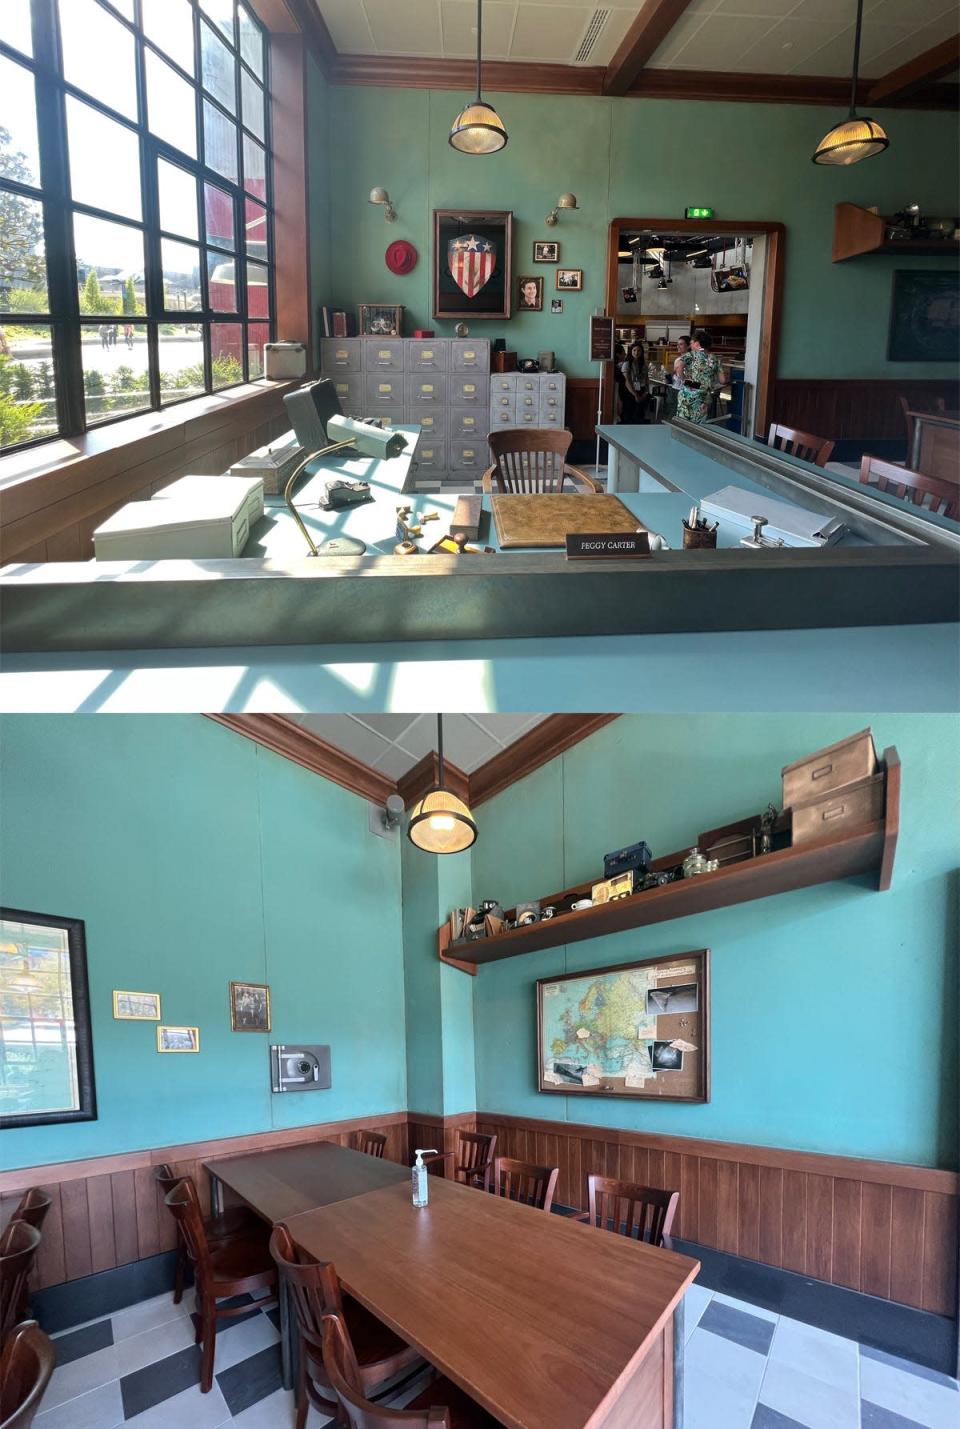 Peggy Carter office in Avengers Campus at Disneyland Paris